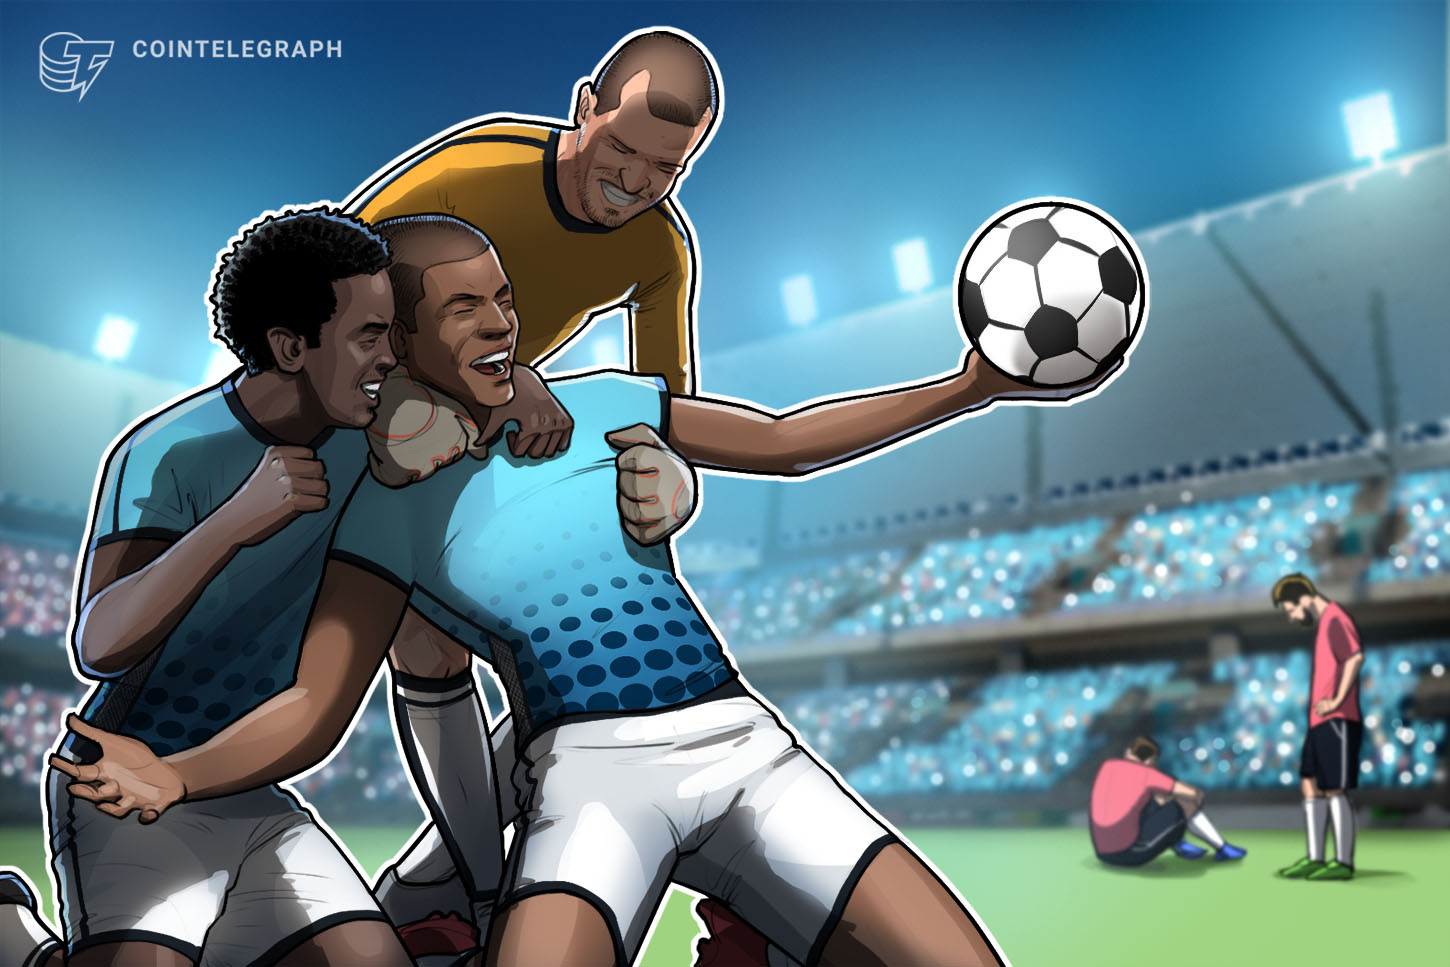 Bayern Munich faucets the pattern for blockchain-based fantasy soccer